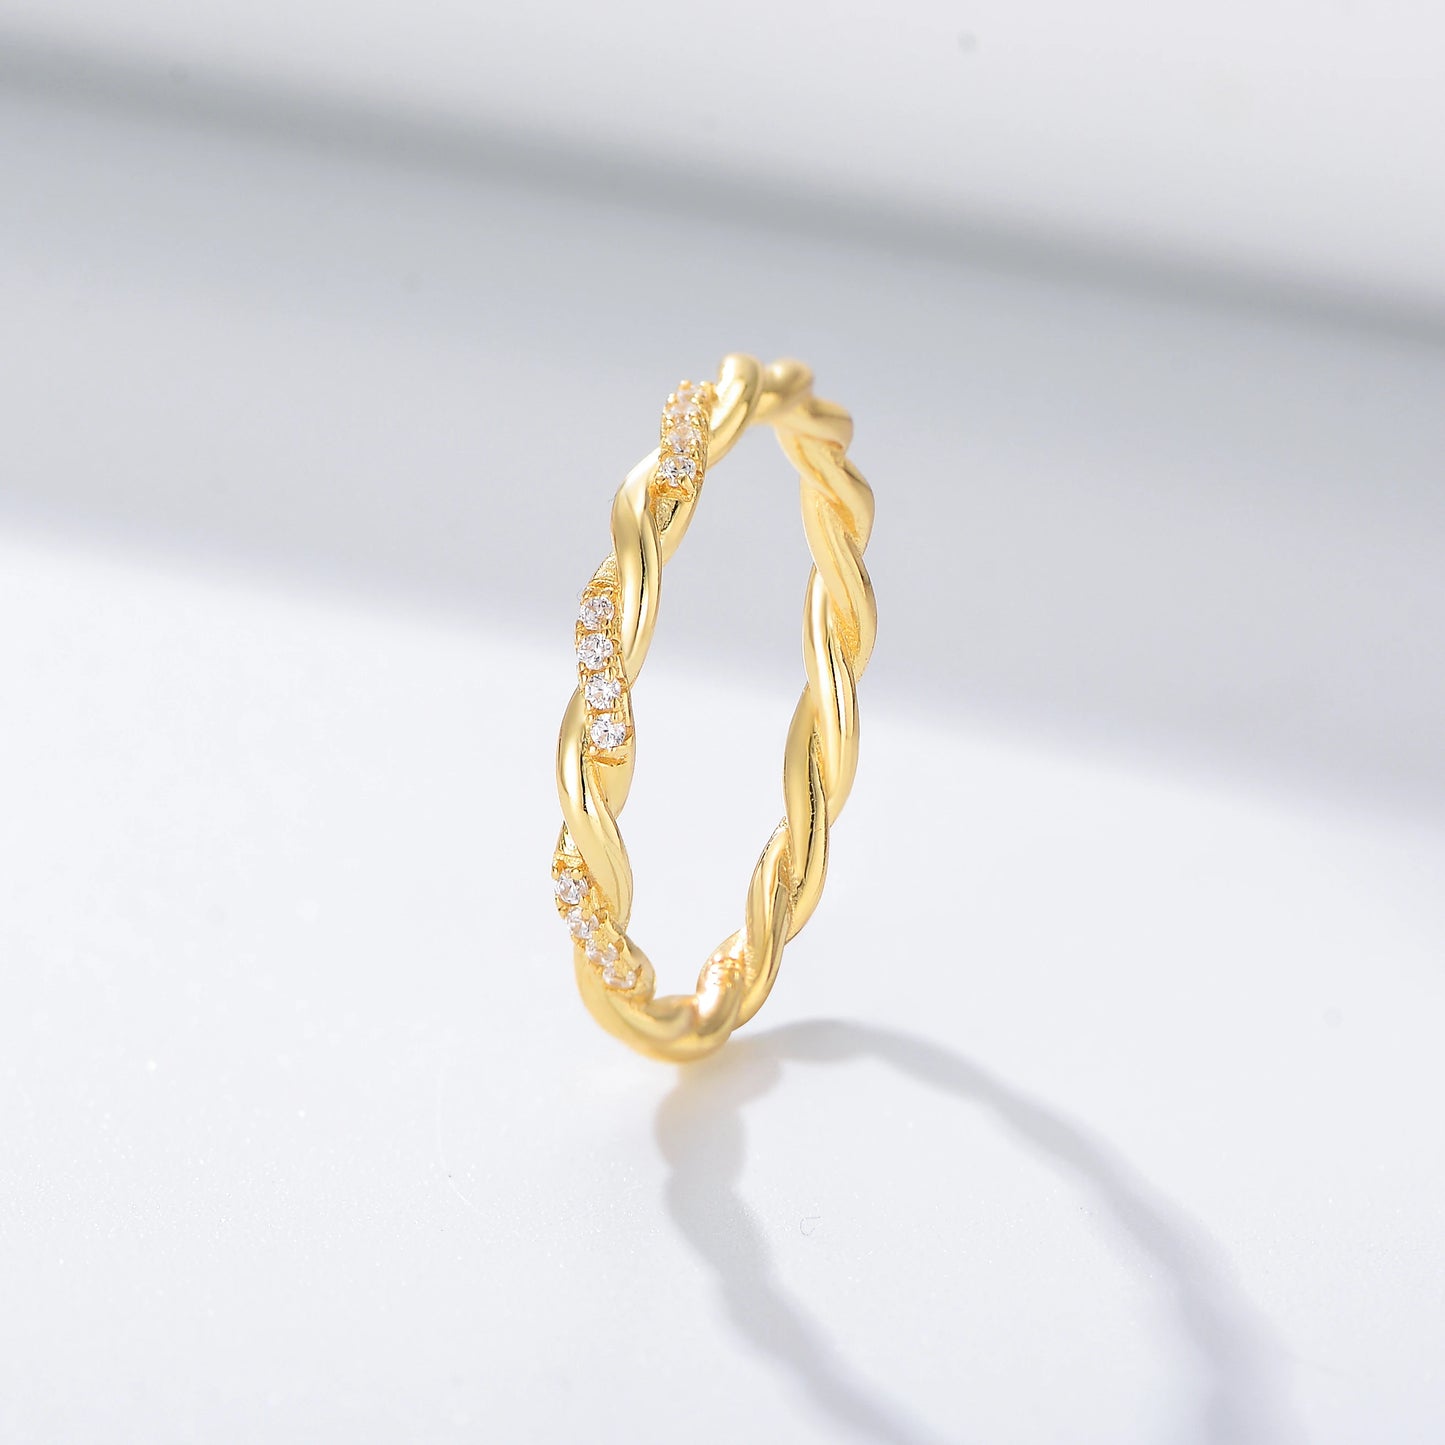 a gold twisted ring with sections of gemstones on it